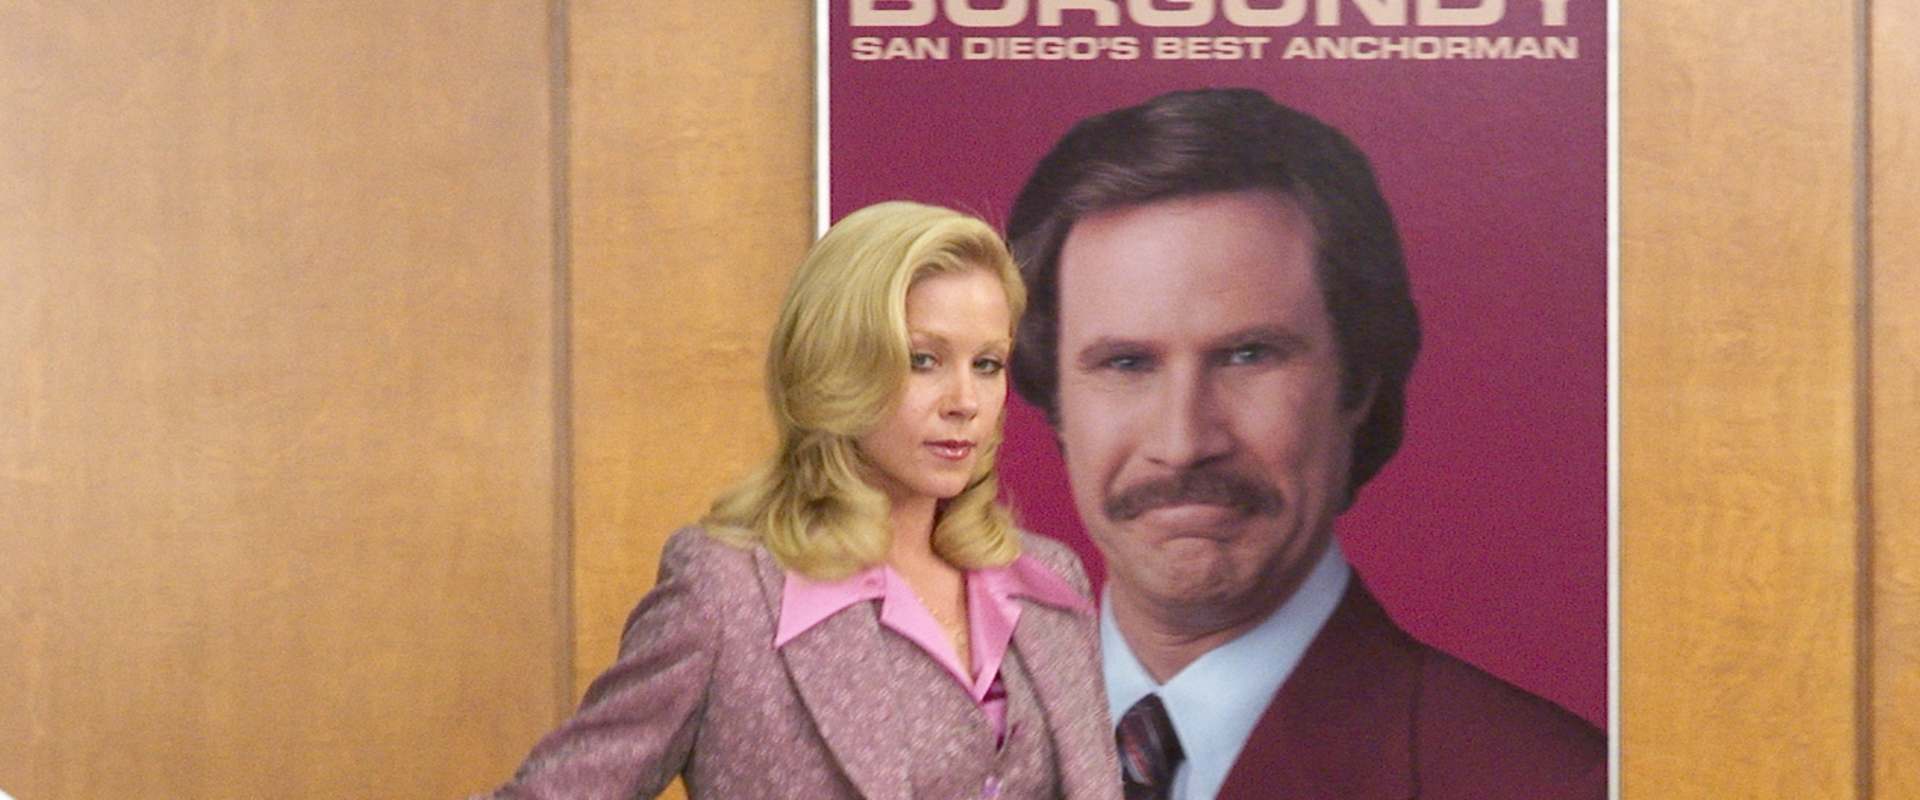 Anchorman: The Legend of Ron Burgundy background 2